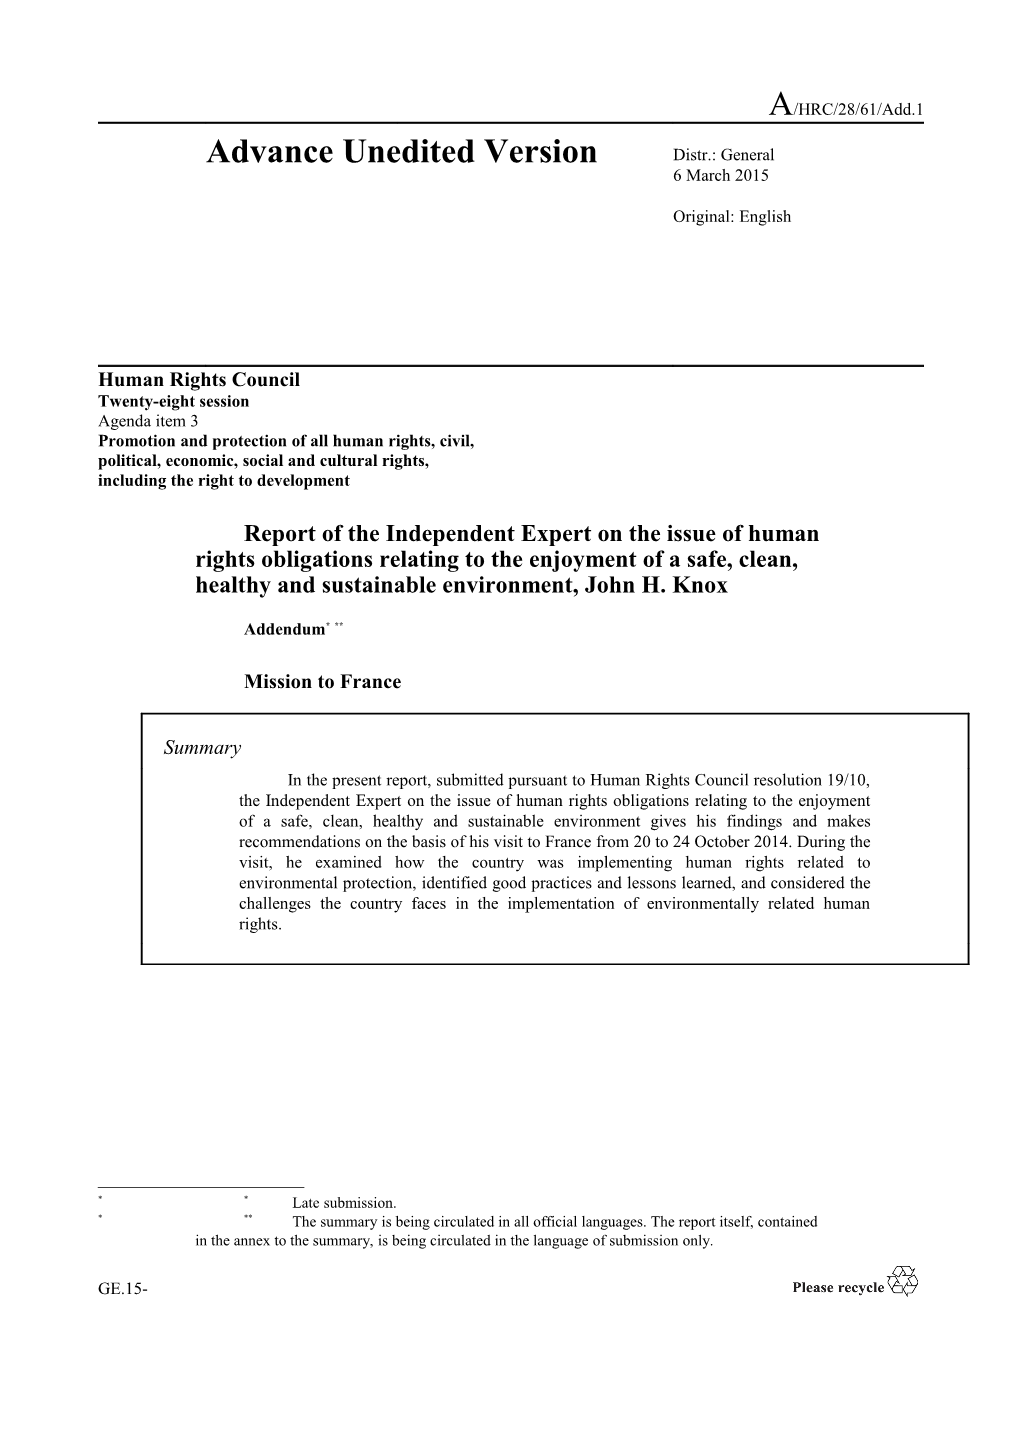 Addendum - Mission to France of the Report of the Independent Expert on the Issue of Human